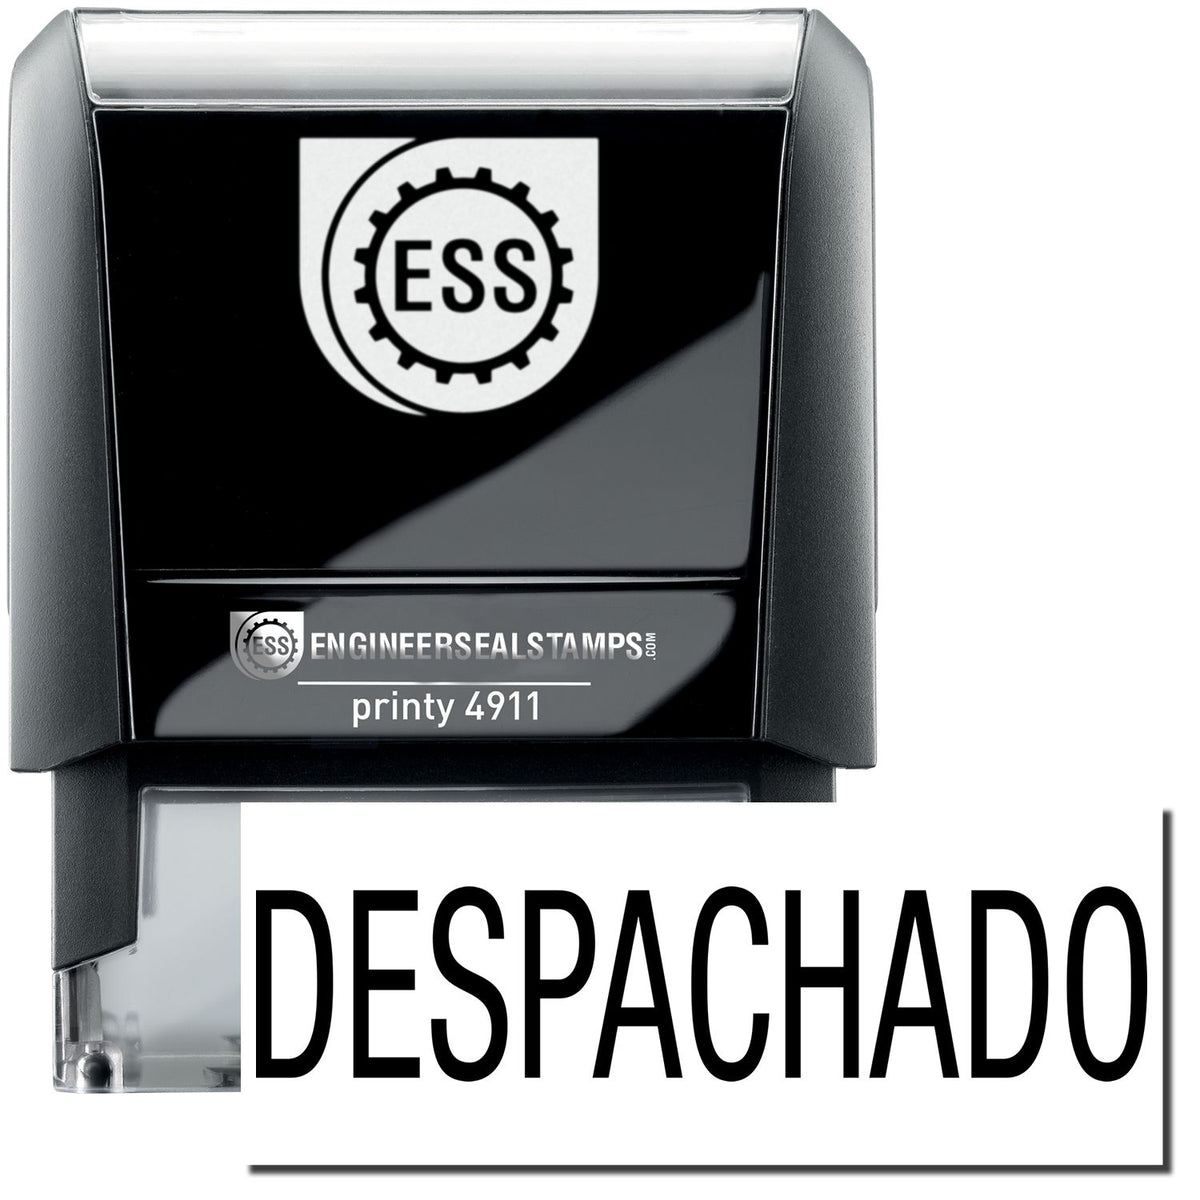 A self-inking stamp with a stamped image showing how the text &quot;DESPACHADO&quot; is displayed after stamping.